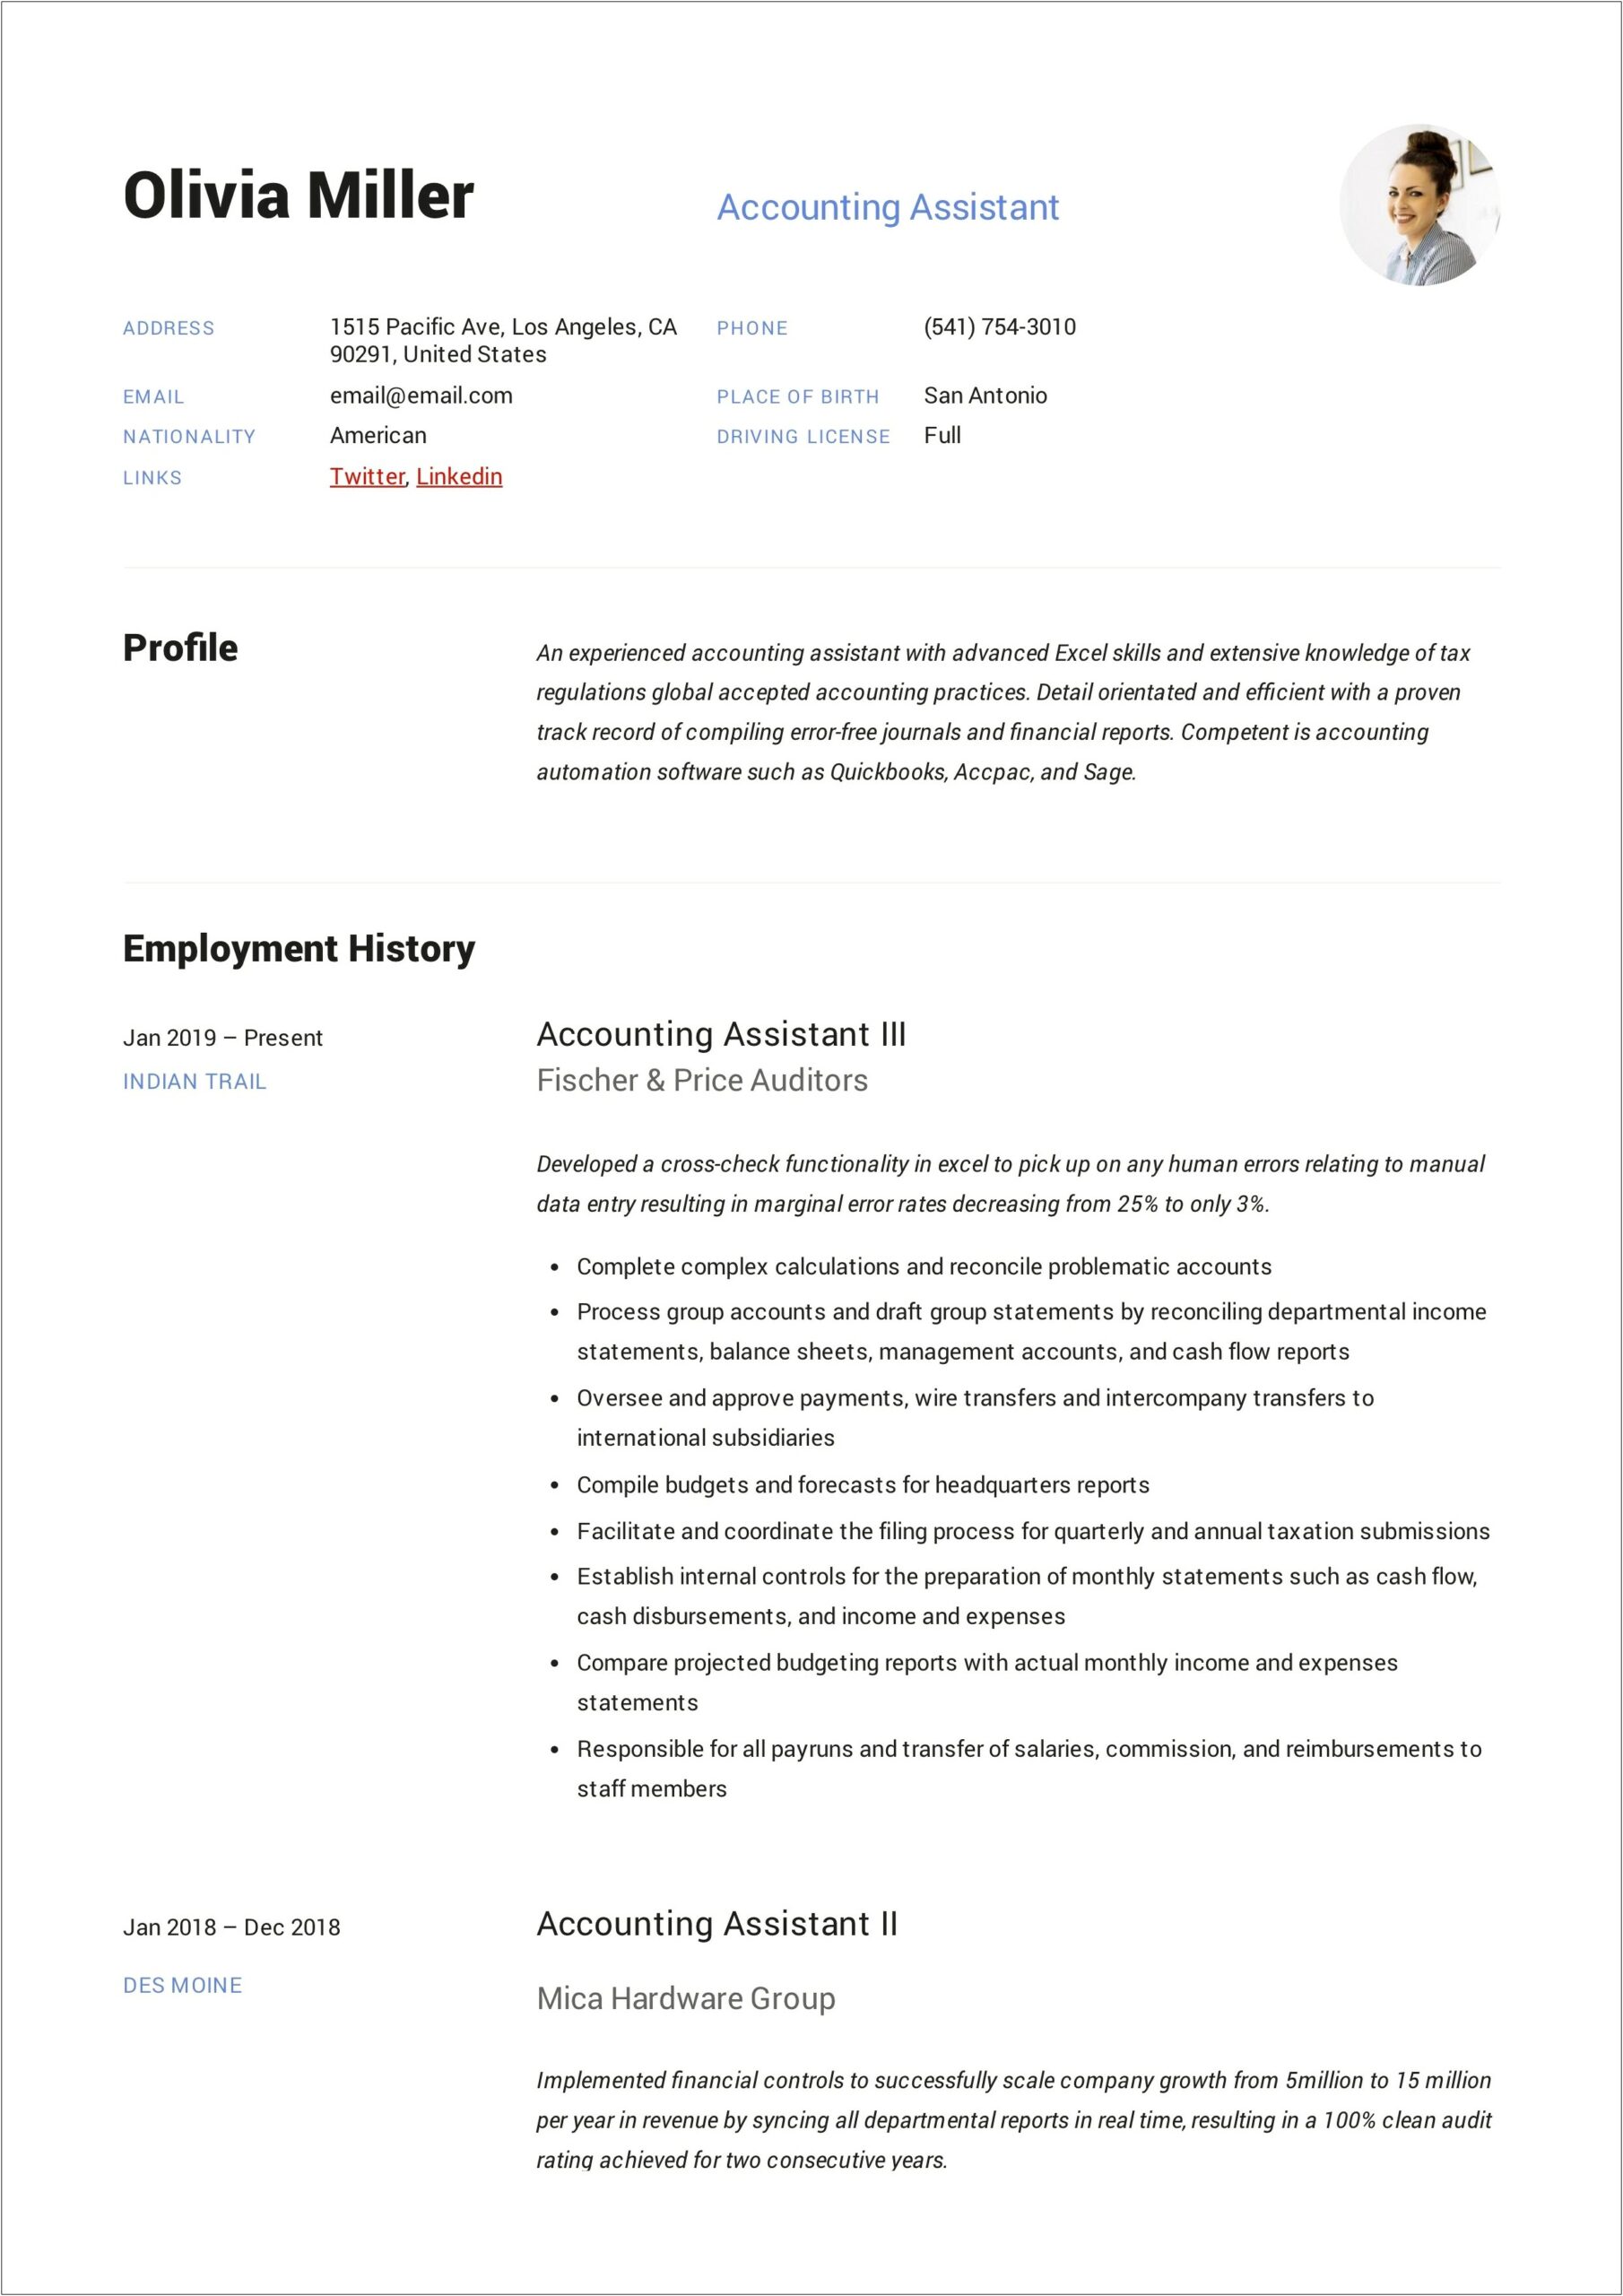 Entry Level Accounting Skills For Resume